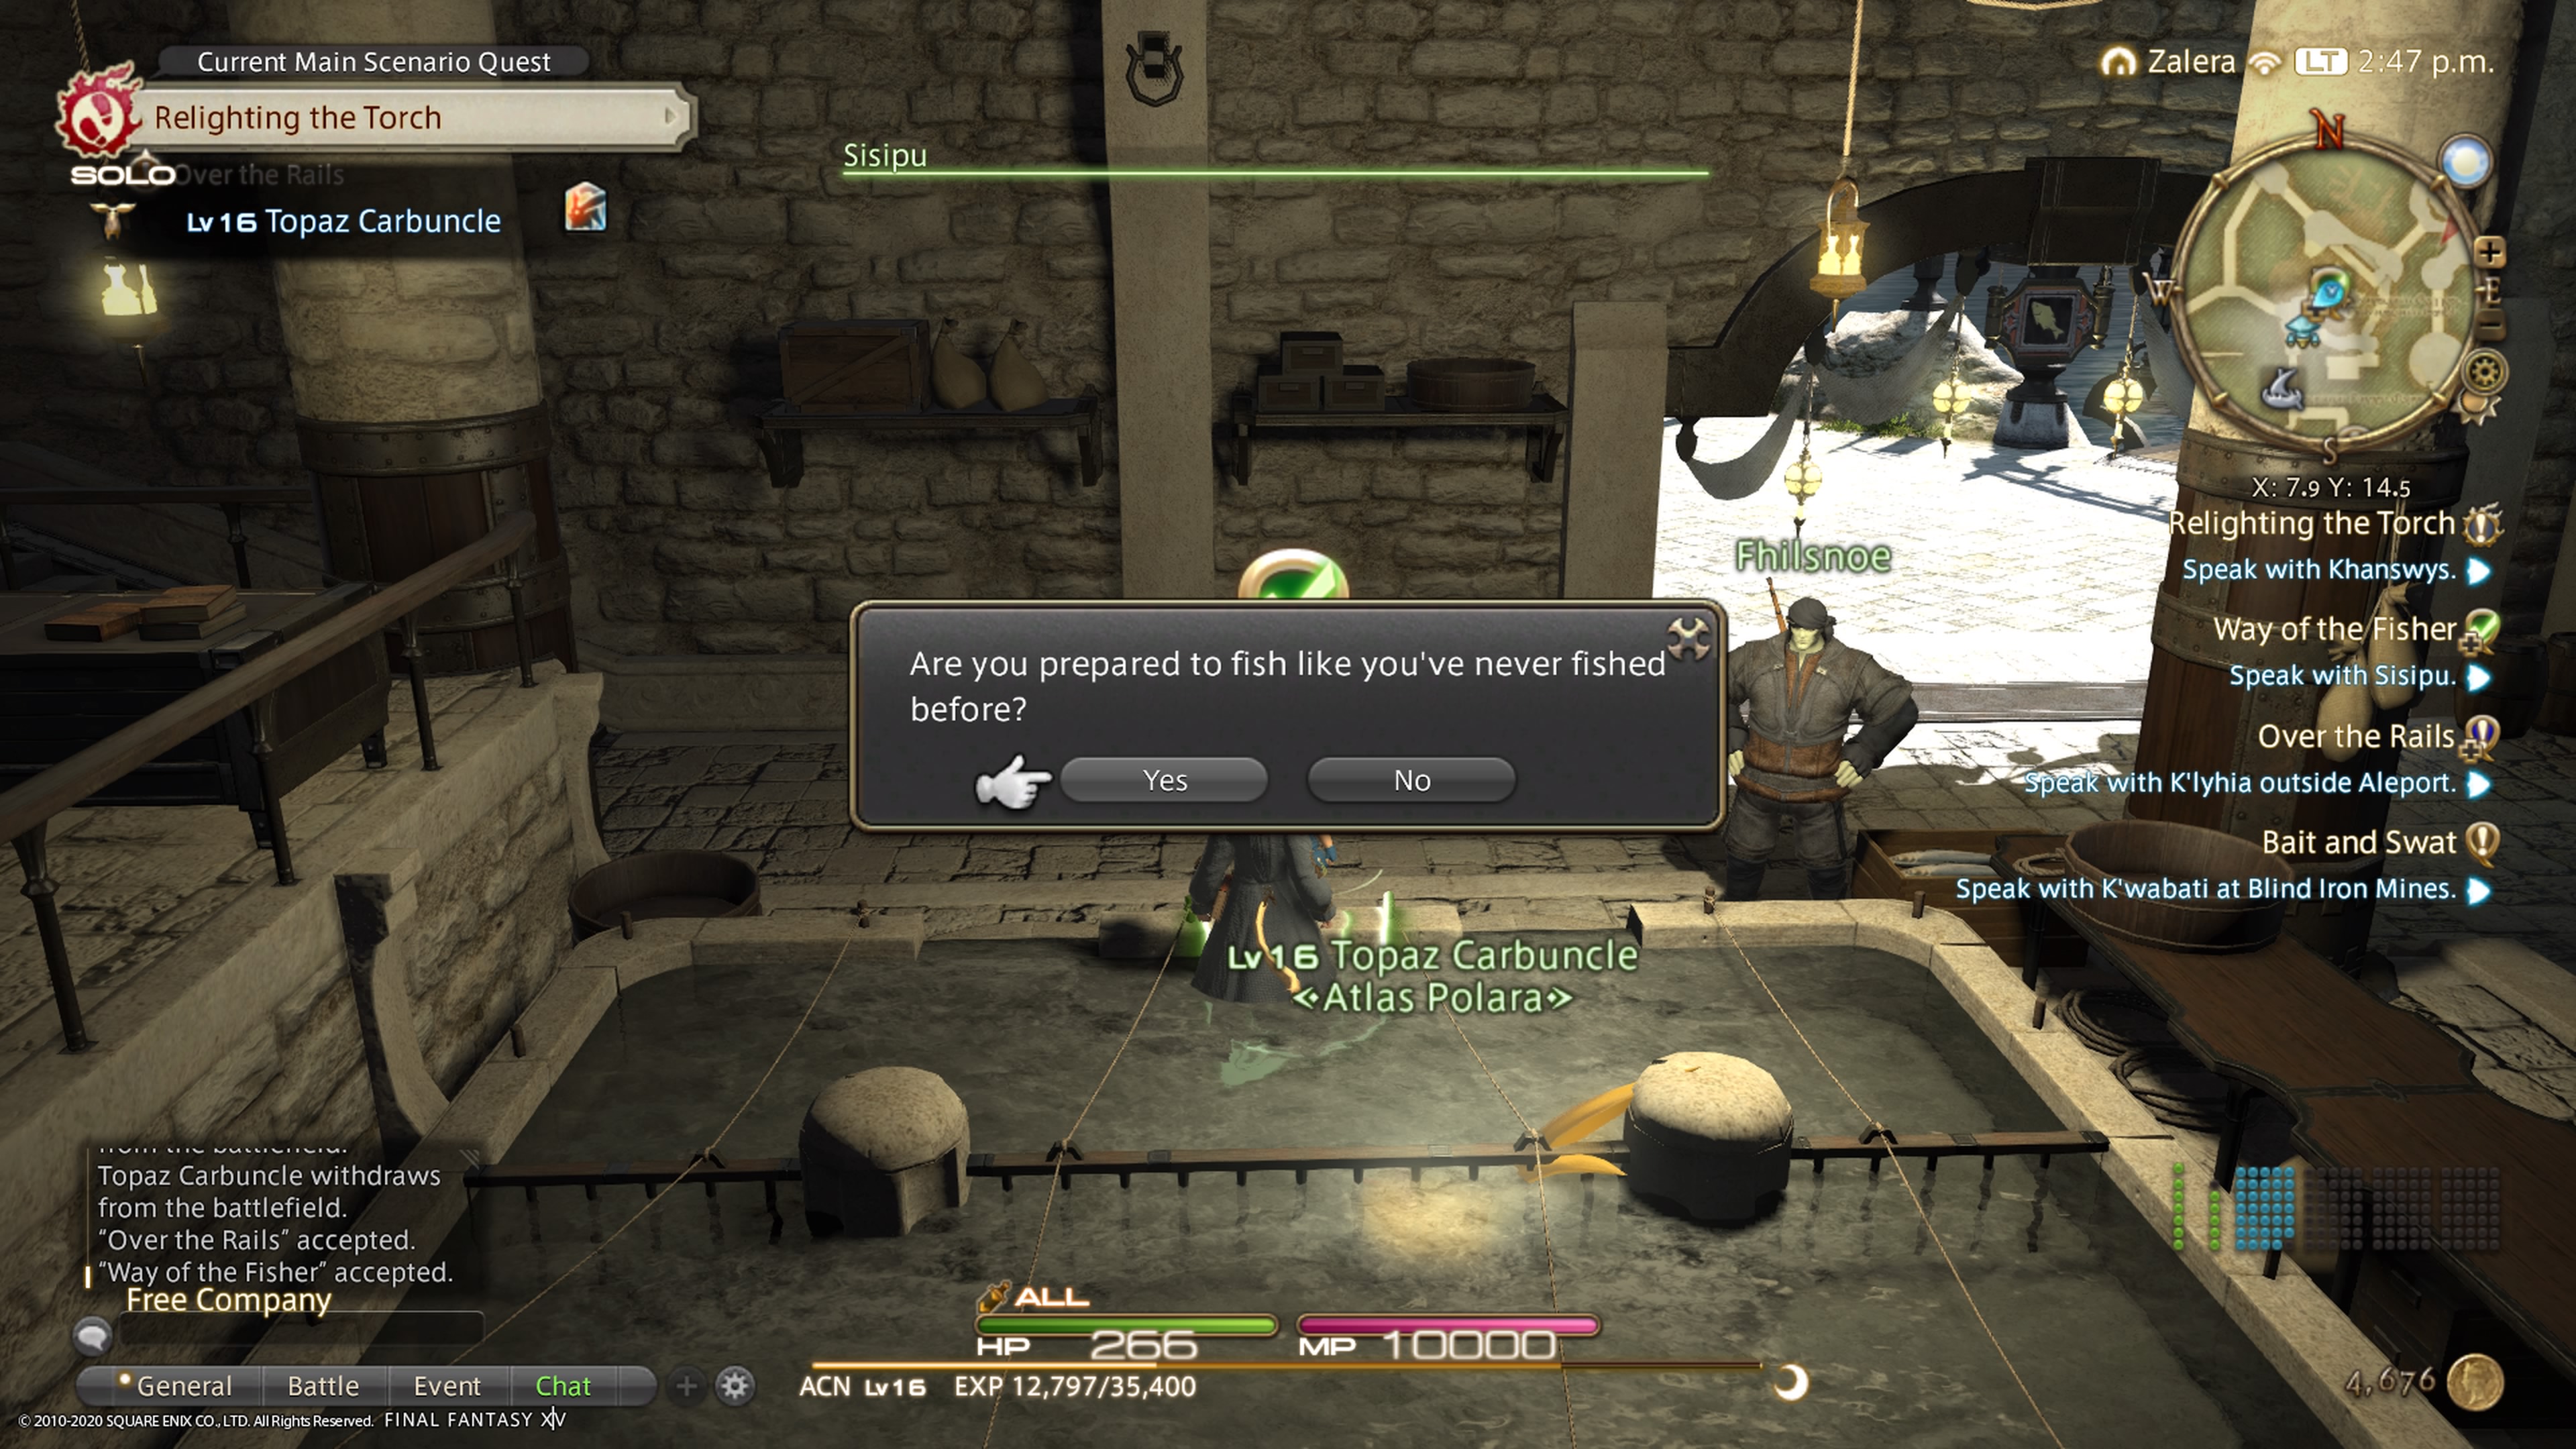 My FFXIV screen again, there is a pop up that says "Are you prepared to fish like you've never fished before?"